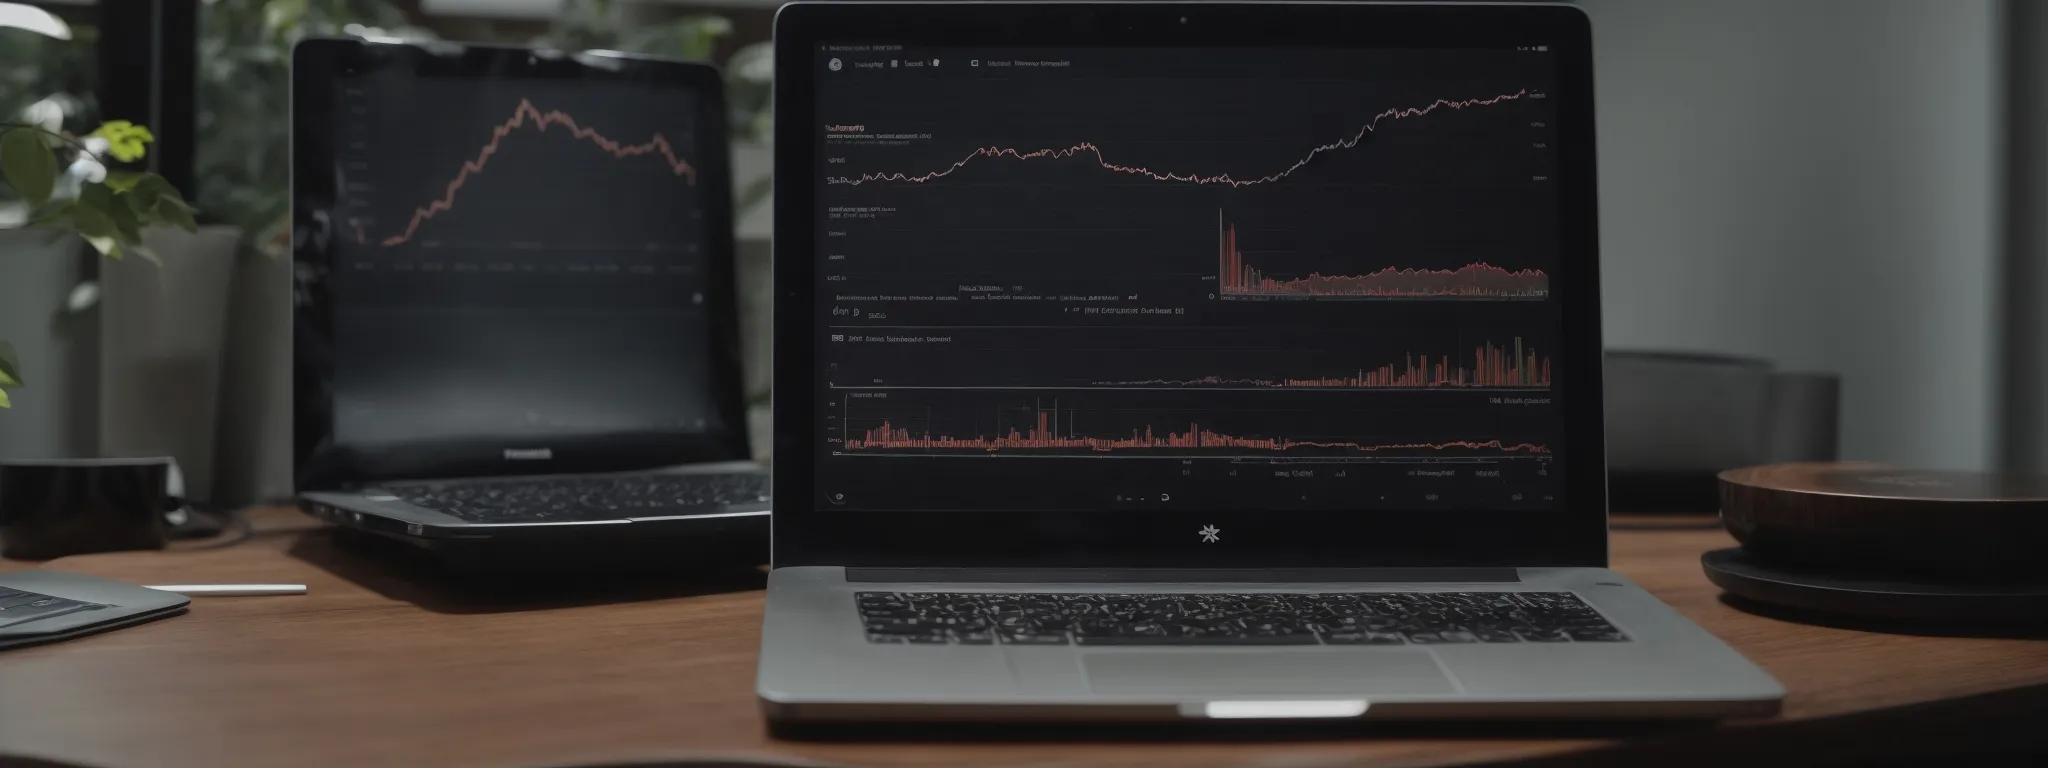 a laptop with a graph-laden interface showing search trends and keyword analytics.